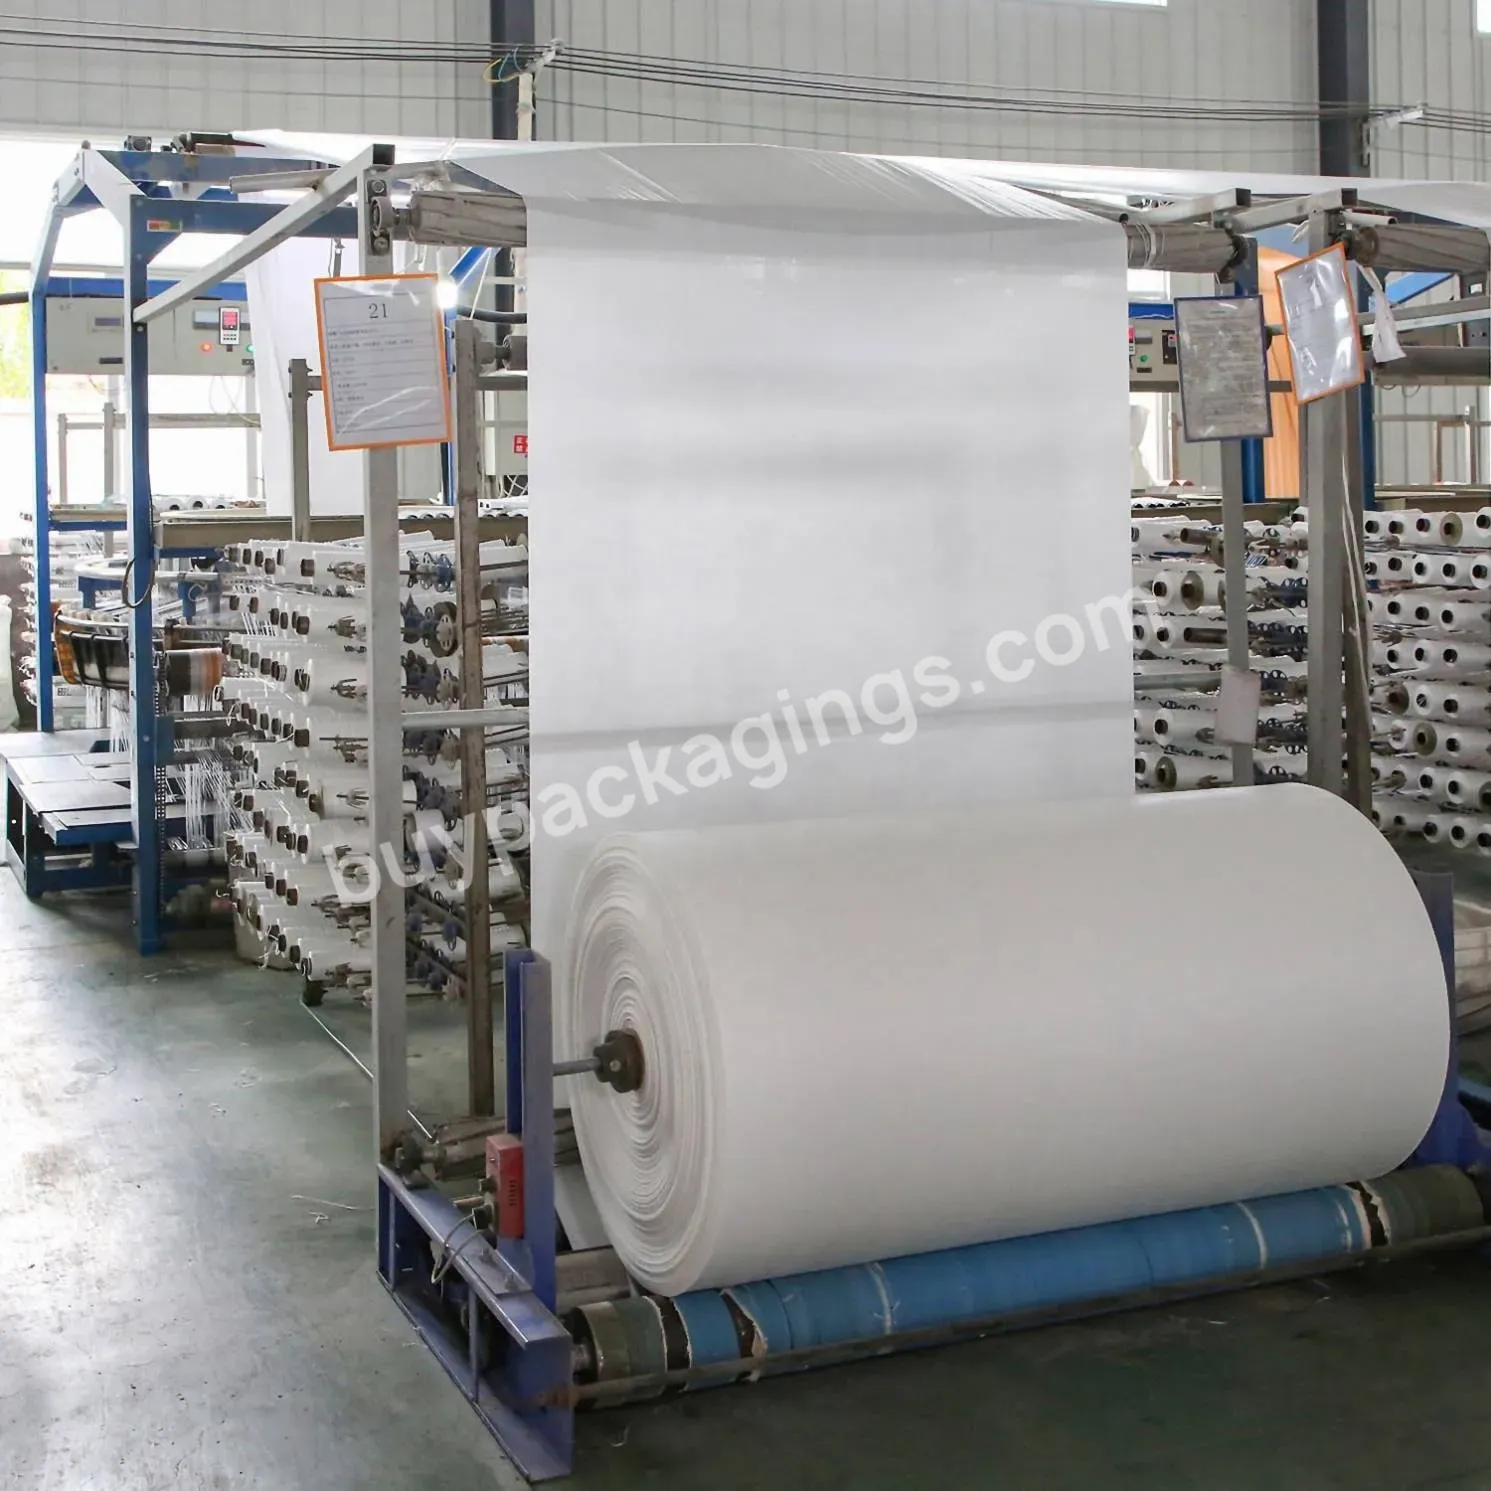 Pp Polypropylene Woven Fabric In Roll Suppliers Manufacturer - Buy Polypropylene Woven Fabric,Woven Fabric In Roll,Woven Fabric.